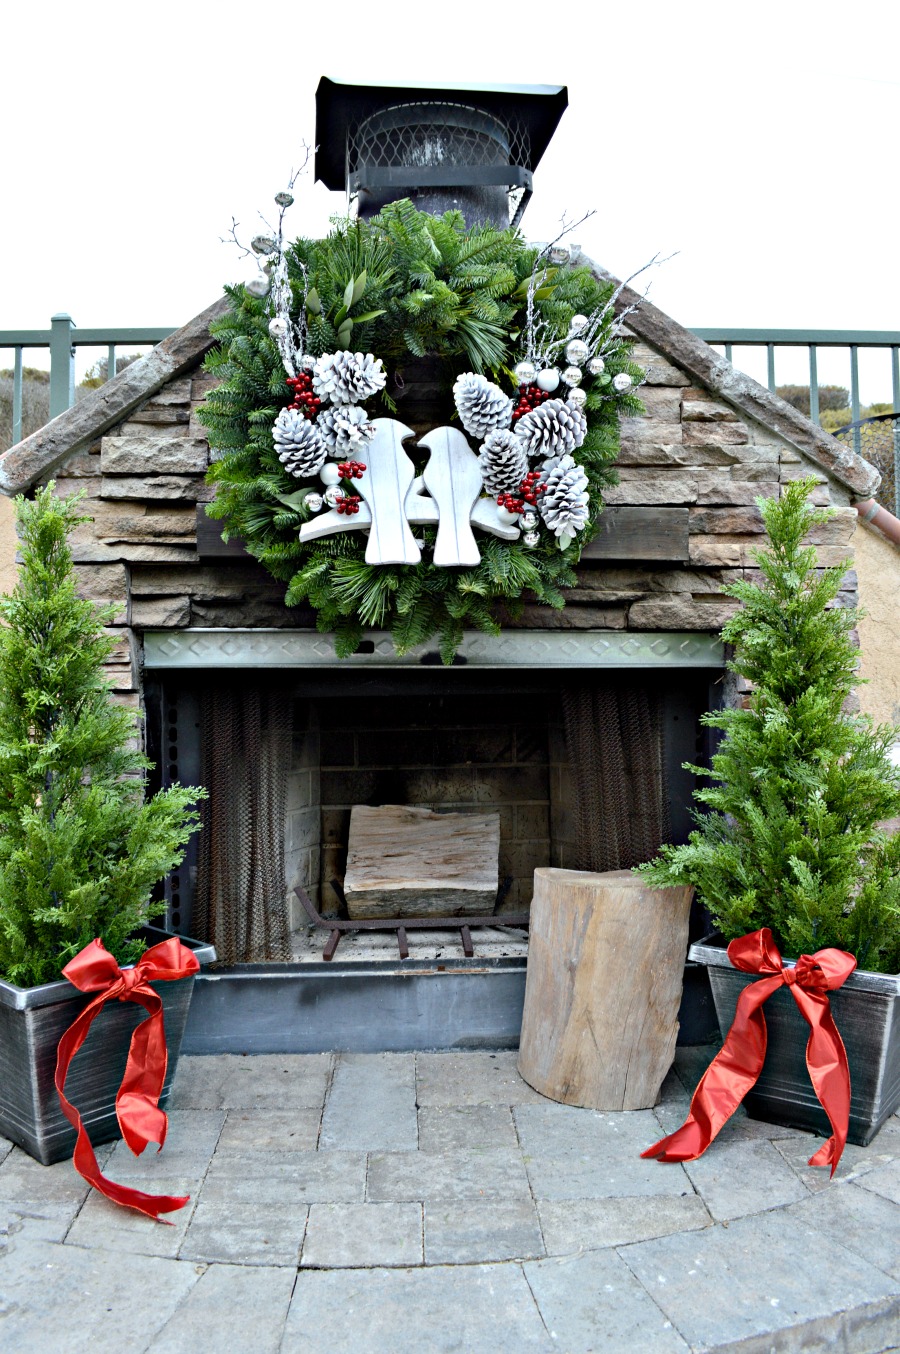 Gorgeous stone fireplace decorated for Christmas with Lynch creek farms wreath